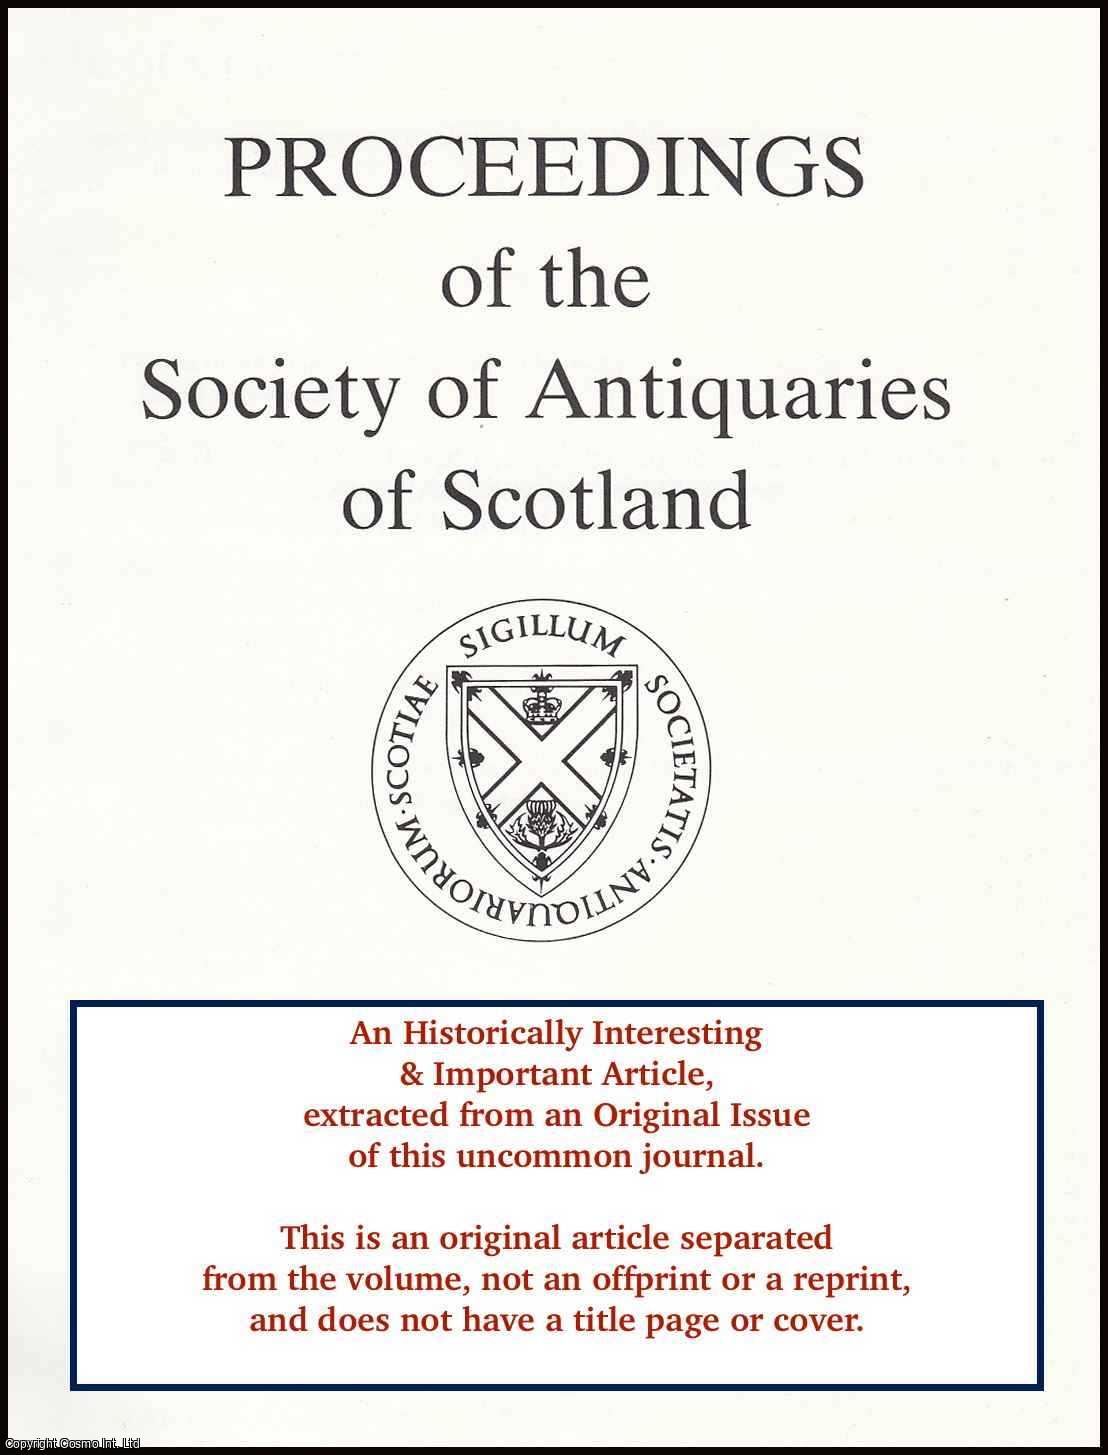 Fraser Hunter - Iron Age Coins in Scotland. An original article from the Proceedings of the Society of Antiquaries of Scotland, 1997.